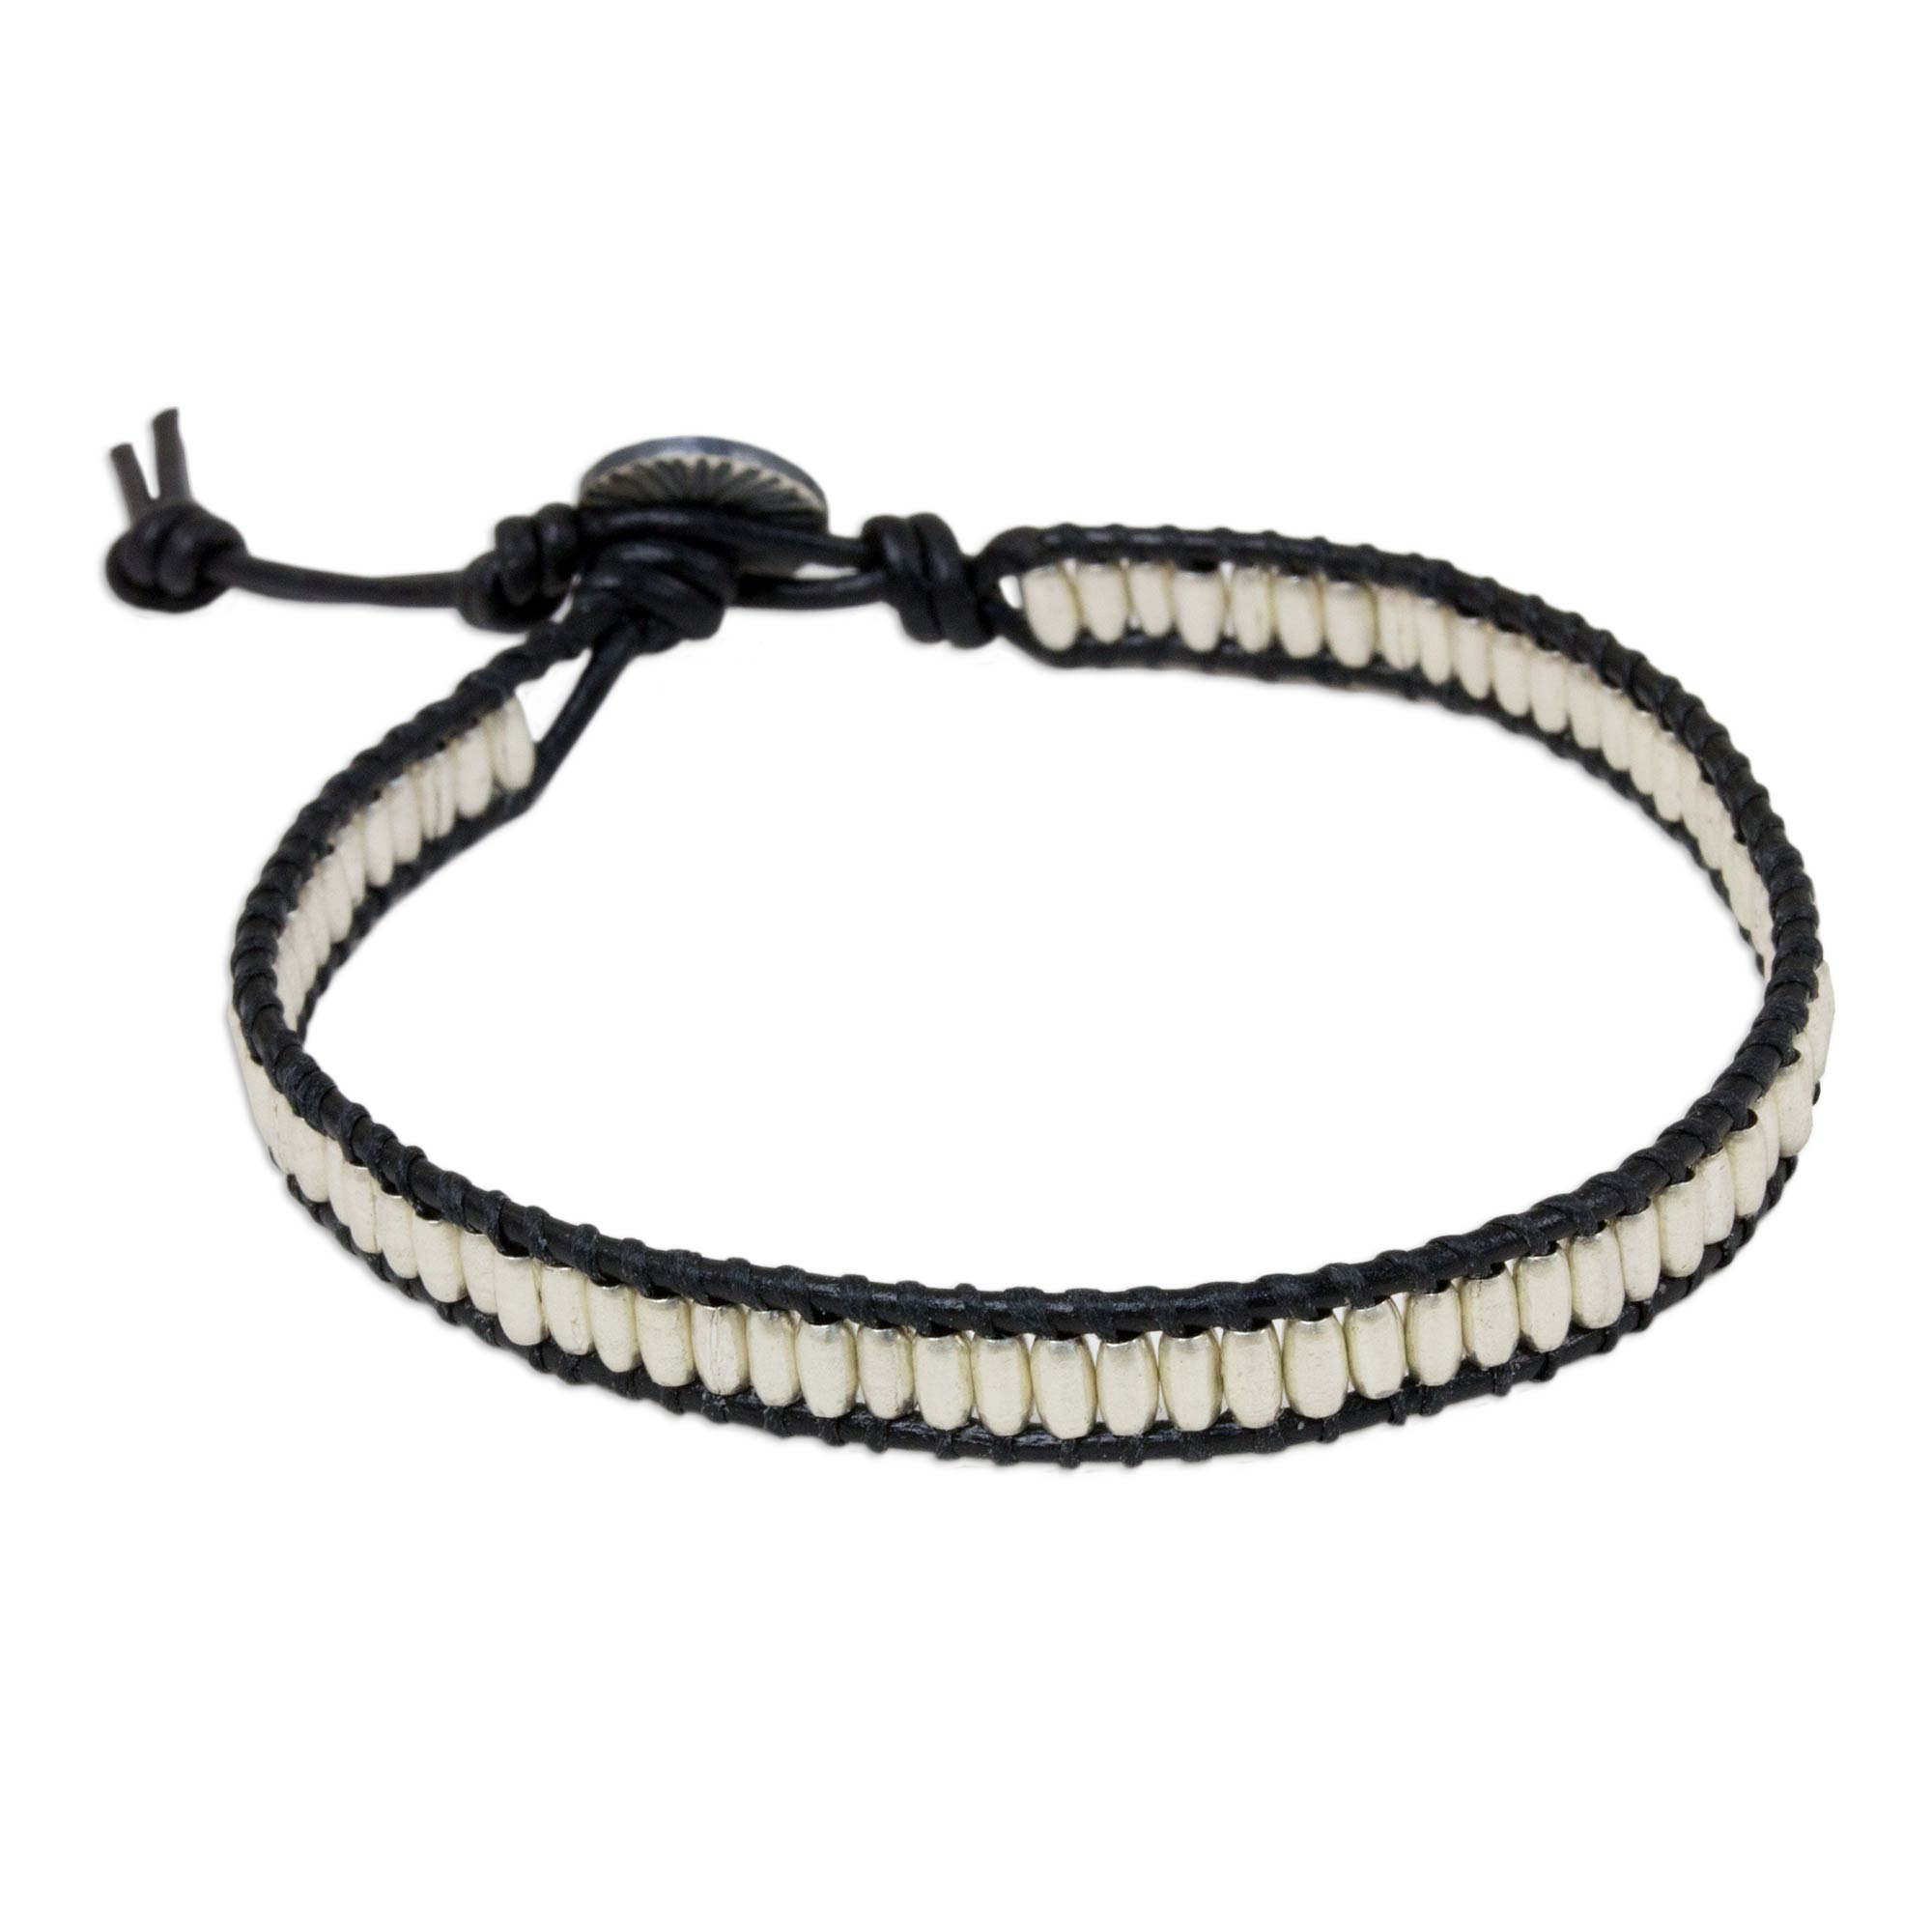 UNICEF Market  Hand Crafted Silver Bead and Leather Cord Bracelet - Matte  Chic